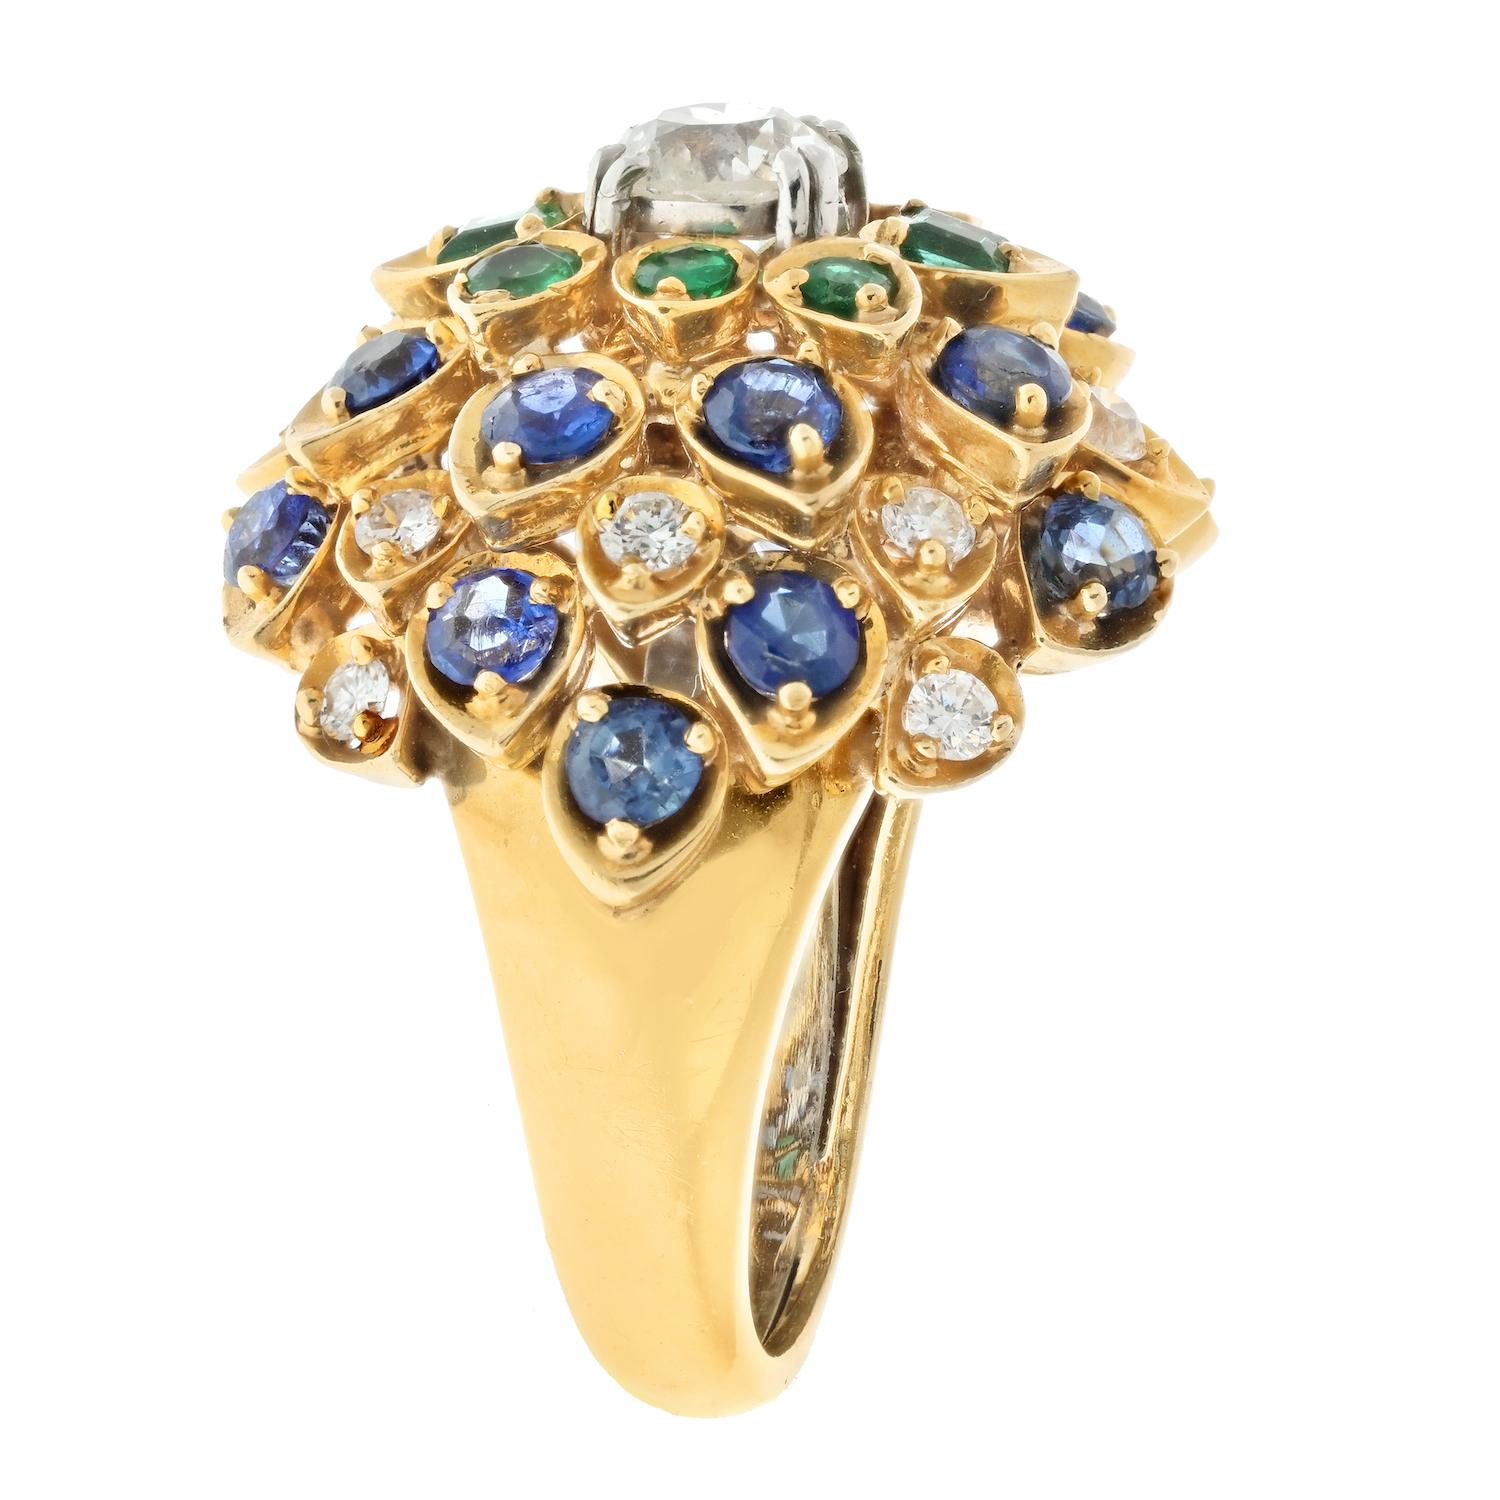 This David Webb Cluster Ring is a stunning example of the designer's impeccable style and craftsmanship. Crafted in 18K yellow gold and dating back to the 1950s, this ring features a center stone that is an old mine diamond. Surrounding the diamond